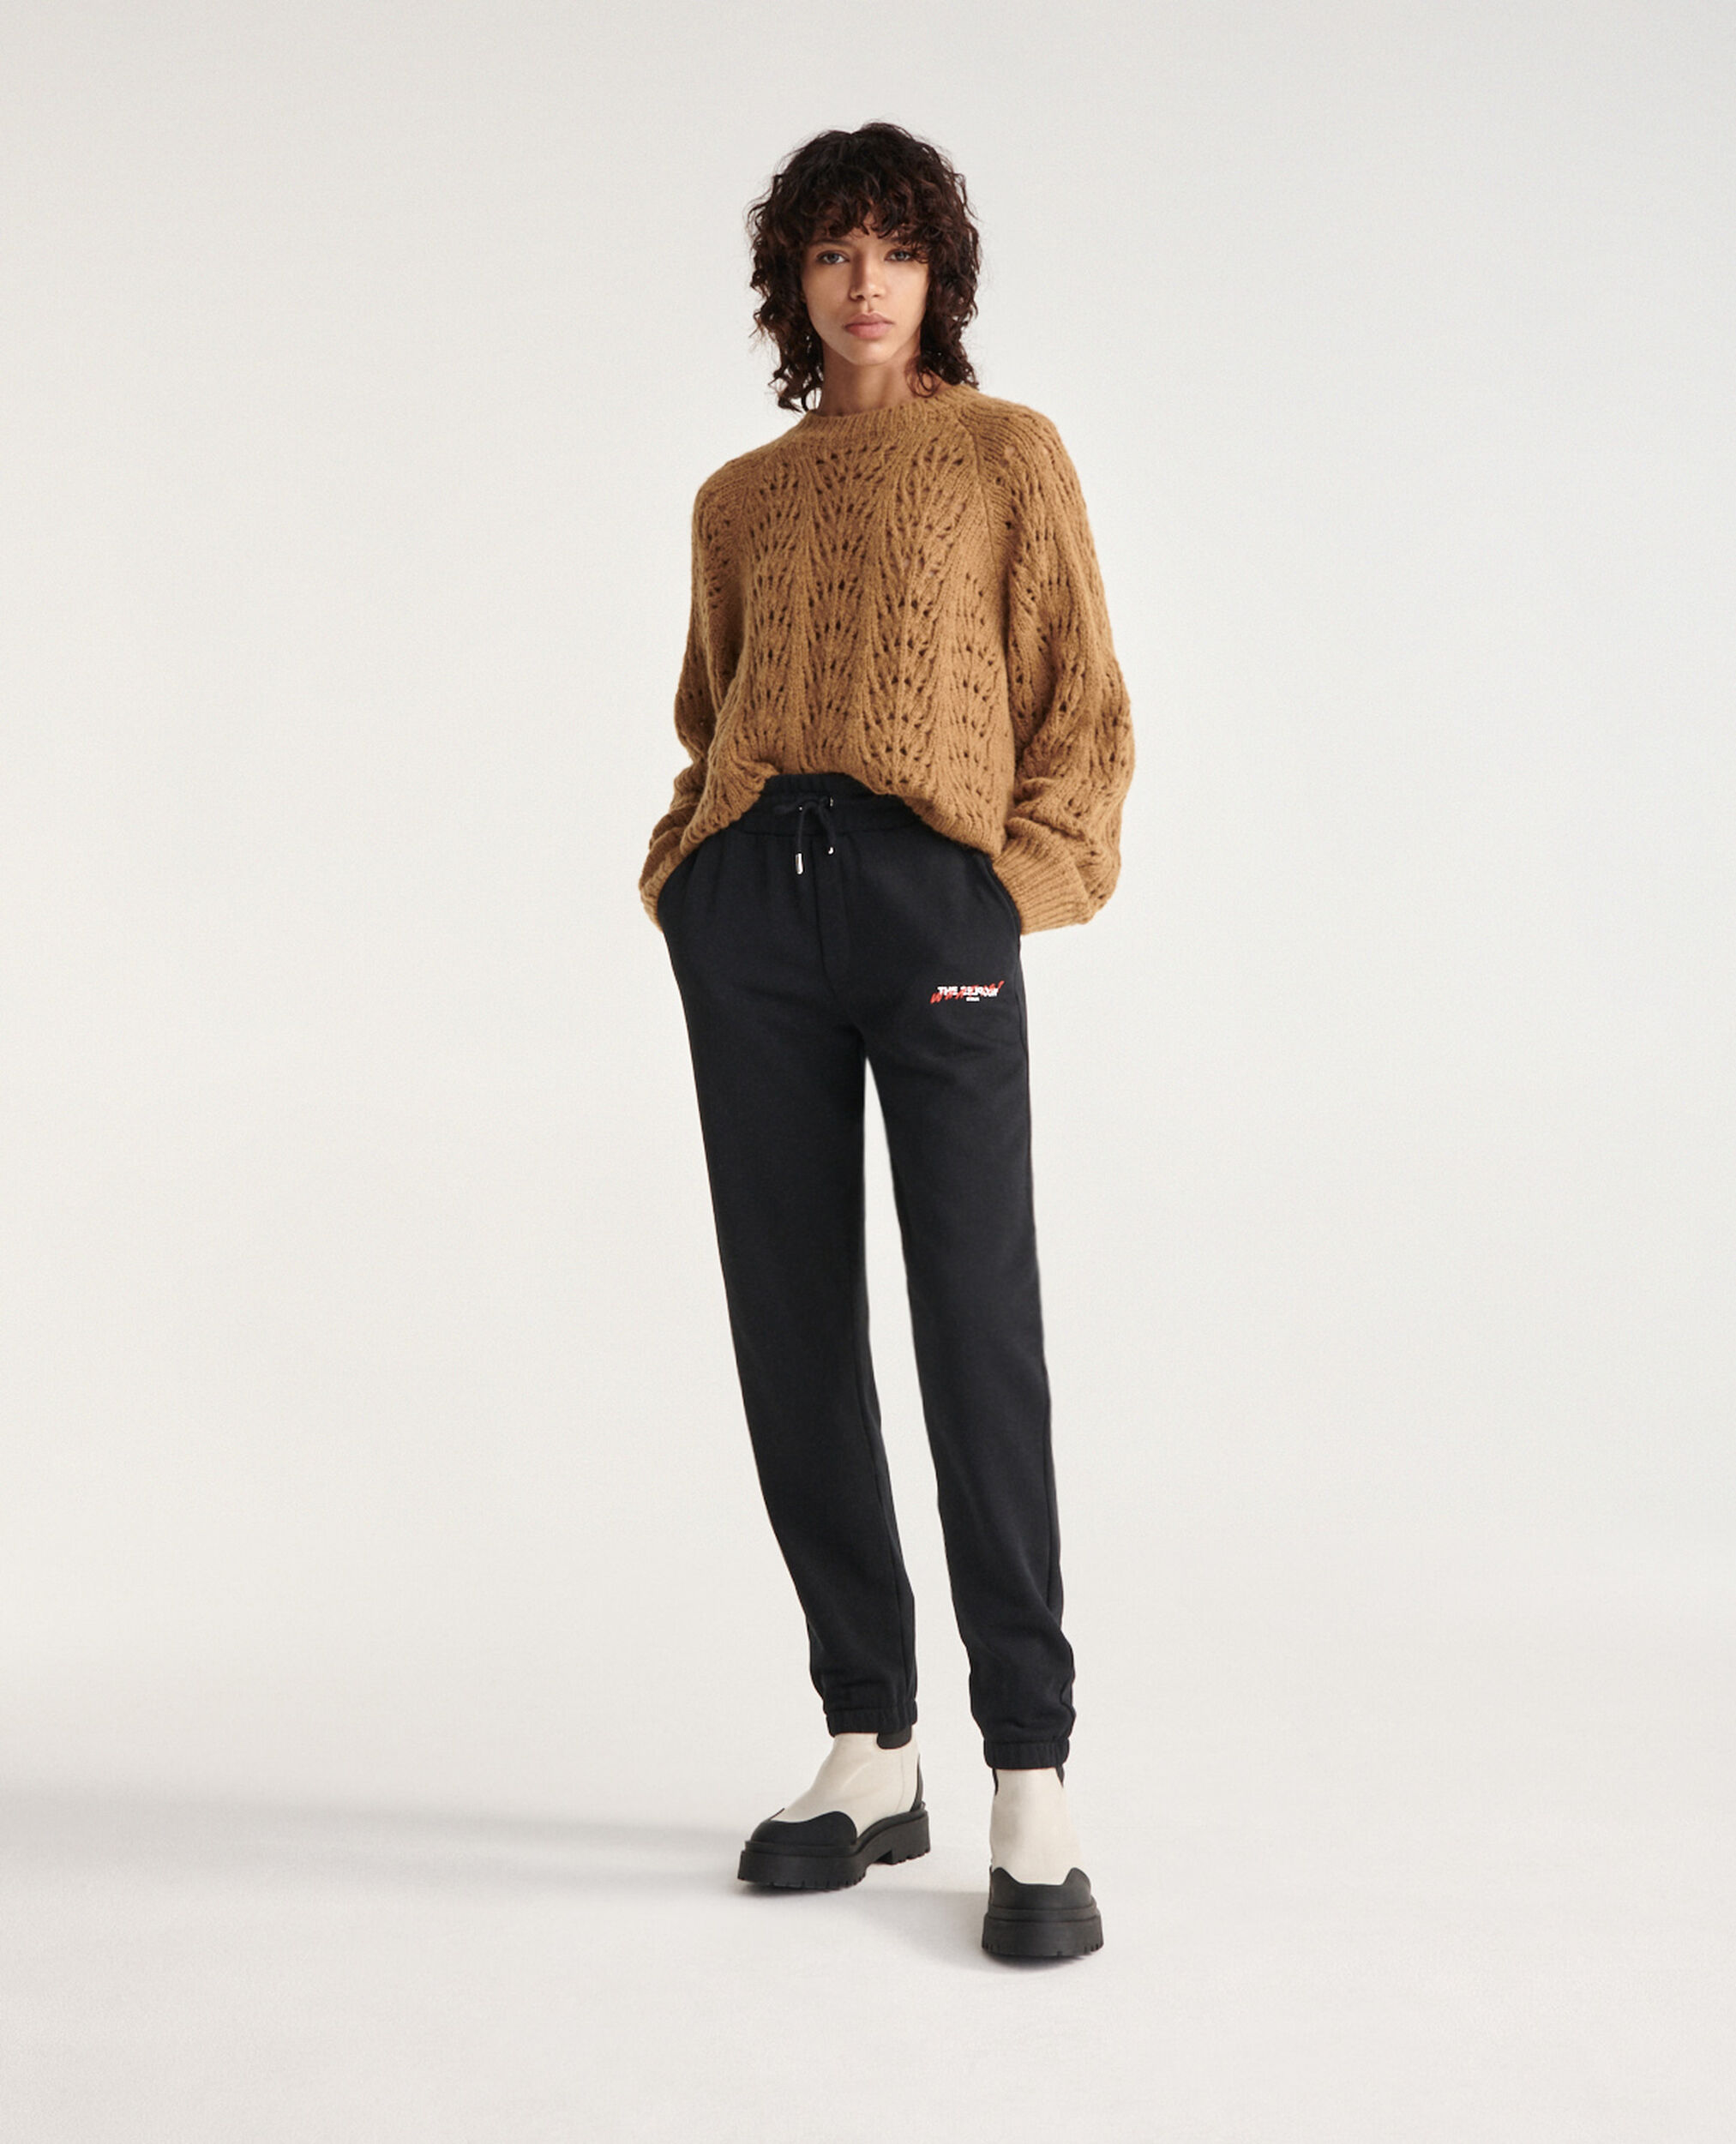 Knit camel sweater with puffed sleeves, BROWN, hi-res image number null